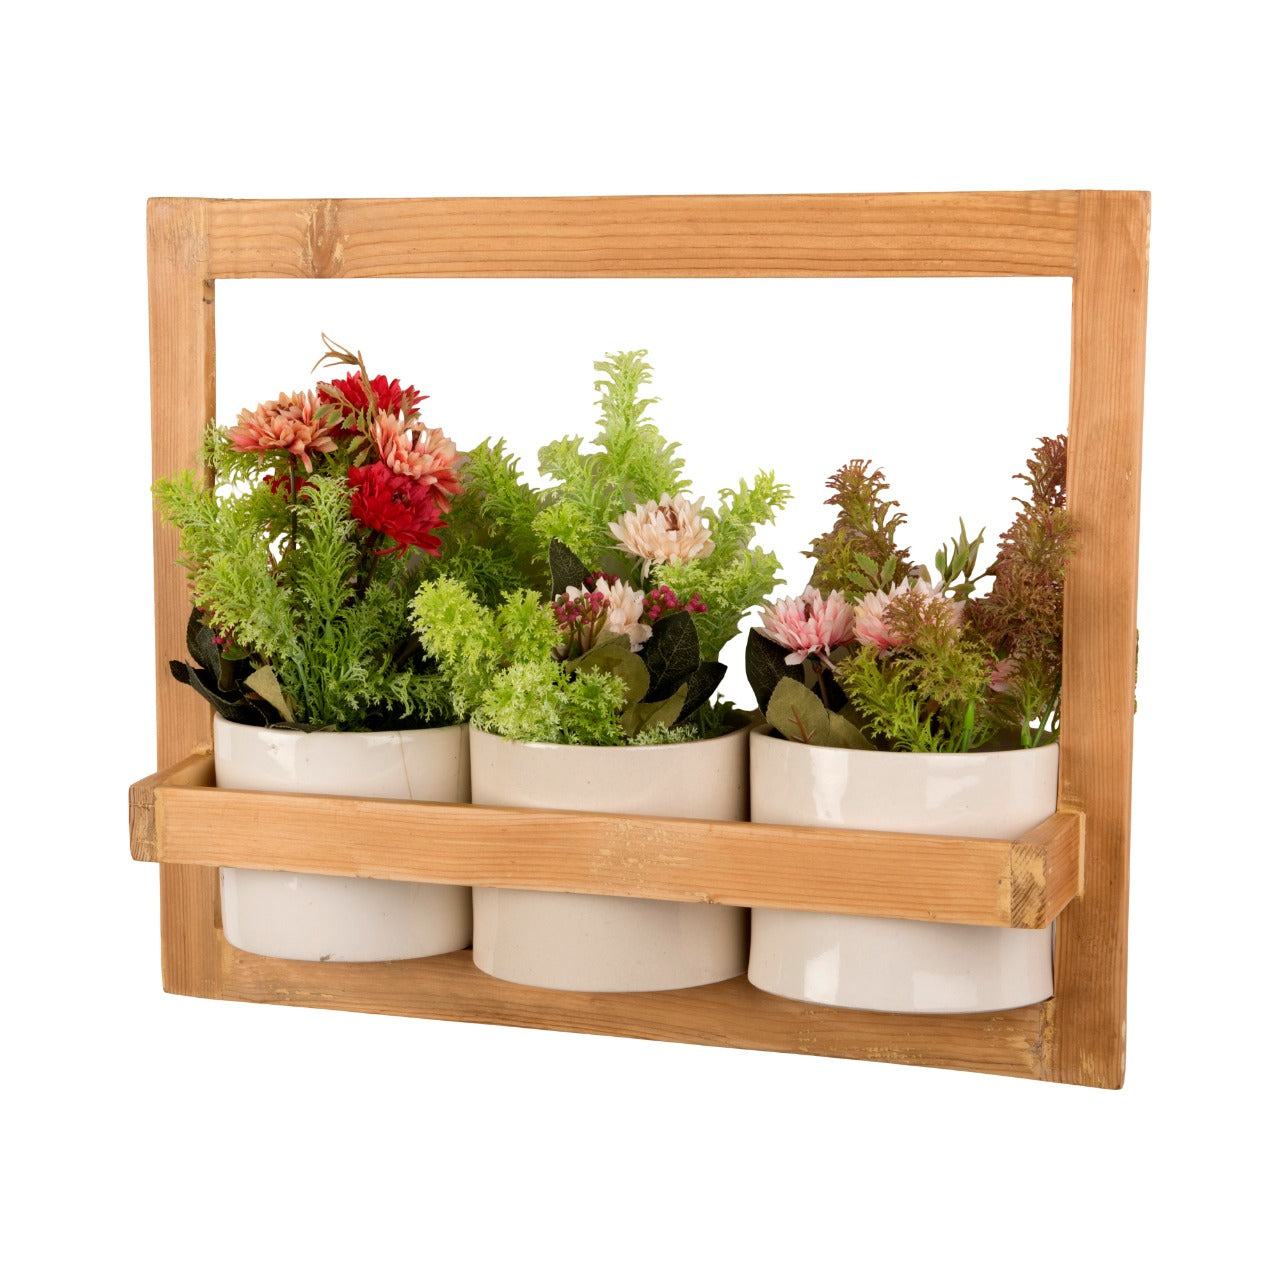 Hanging Wooden Planters with Ceramic Pots